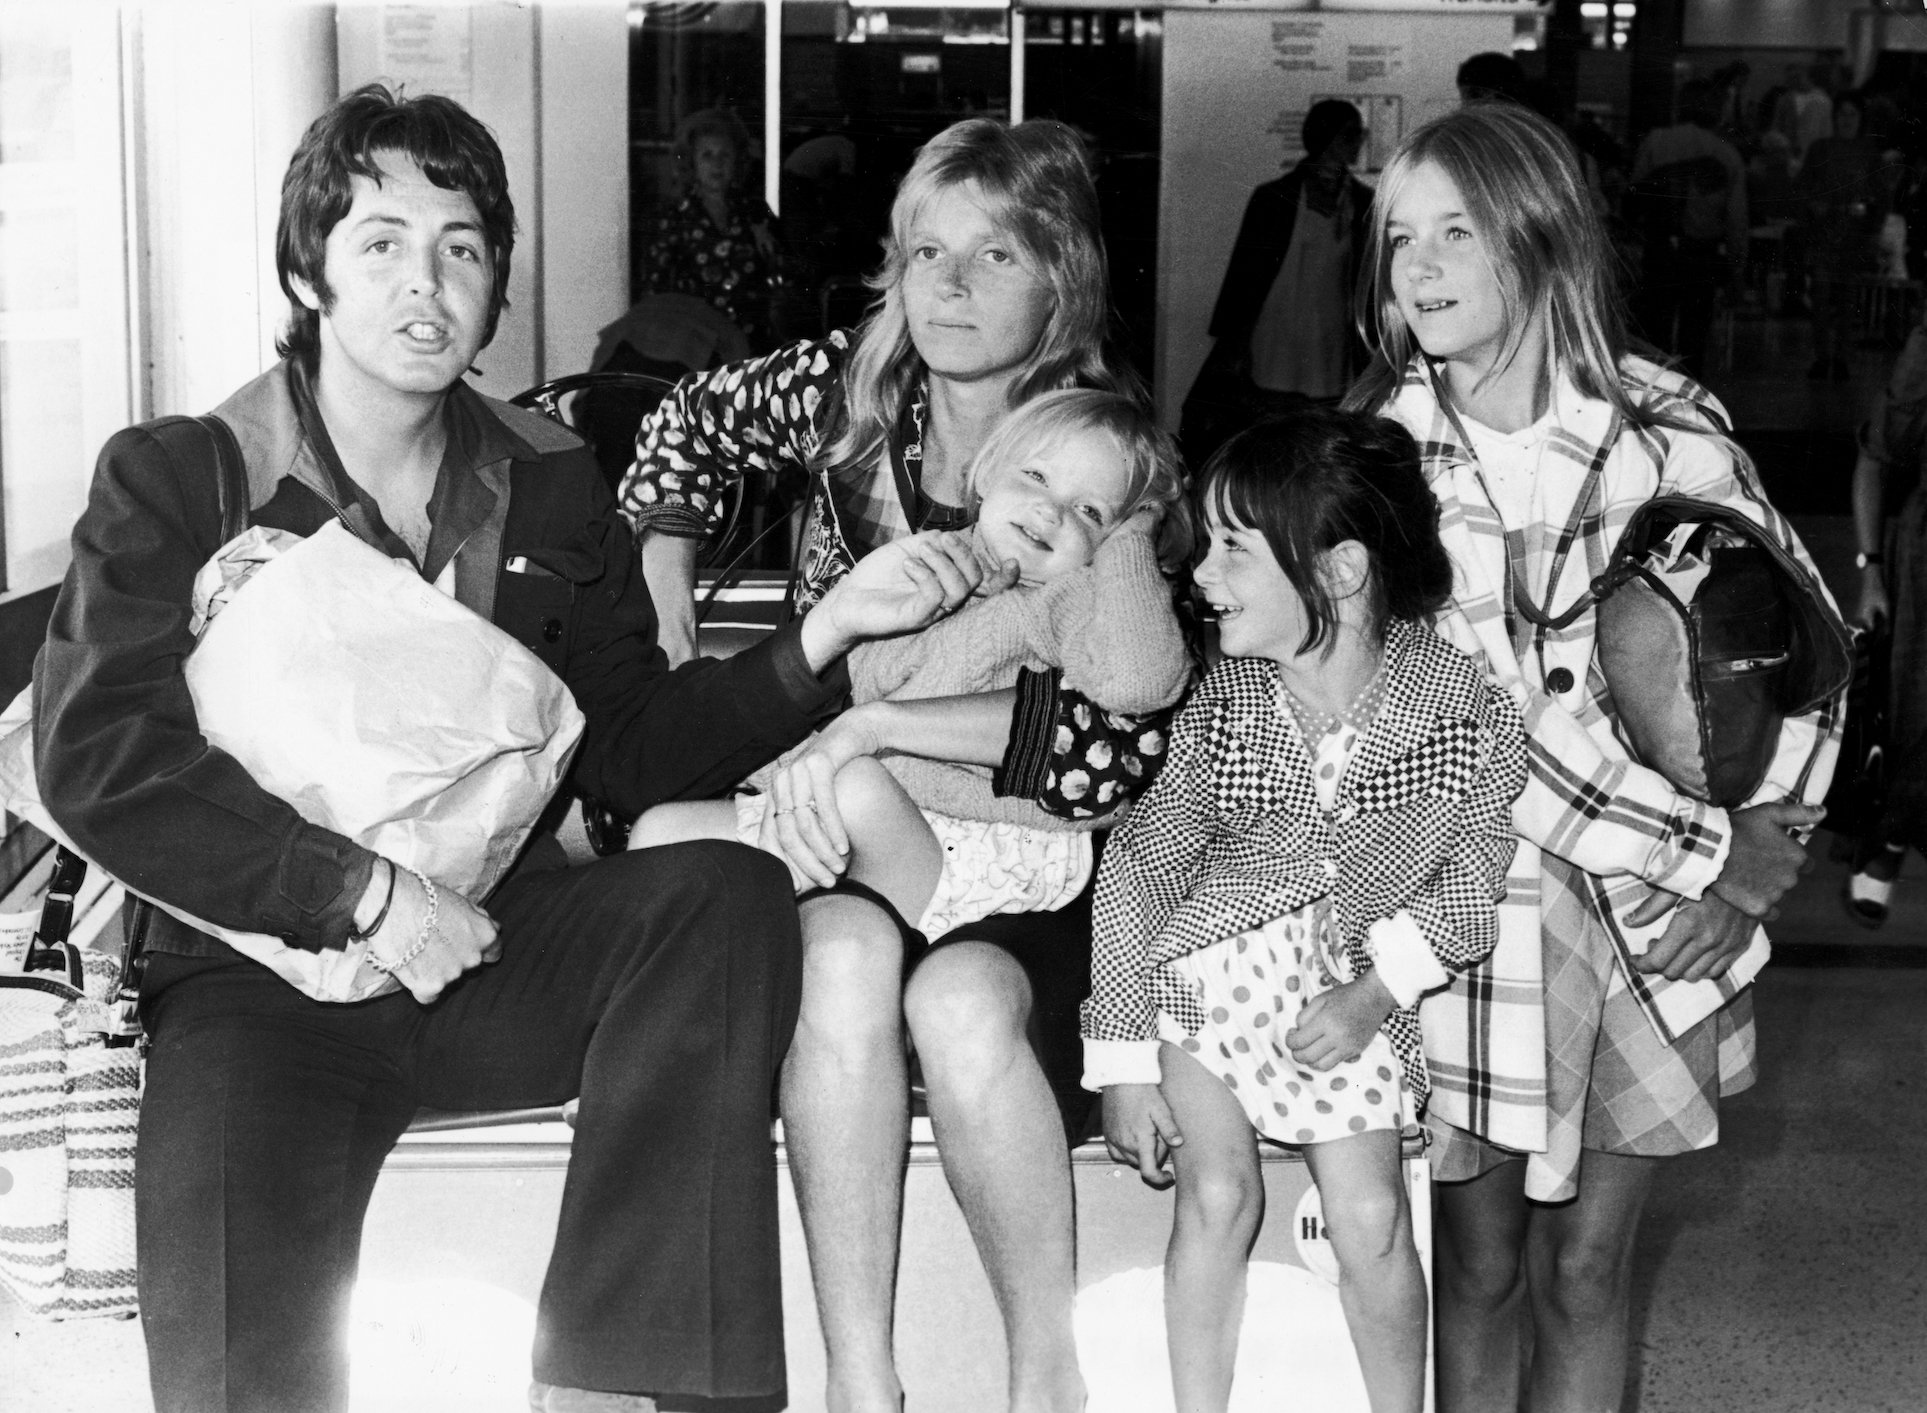 Paul McCartney poses with his wife, Linda, and their daughters at Heathrow Airport in London, England